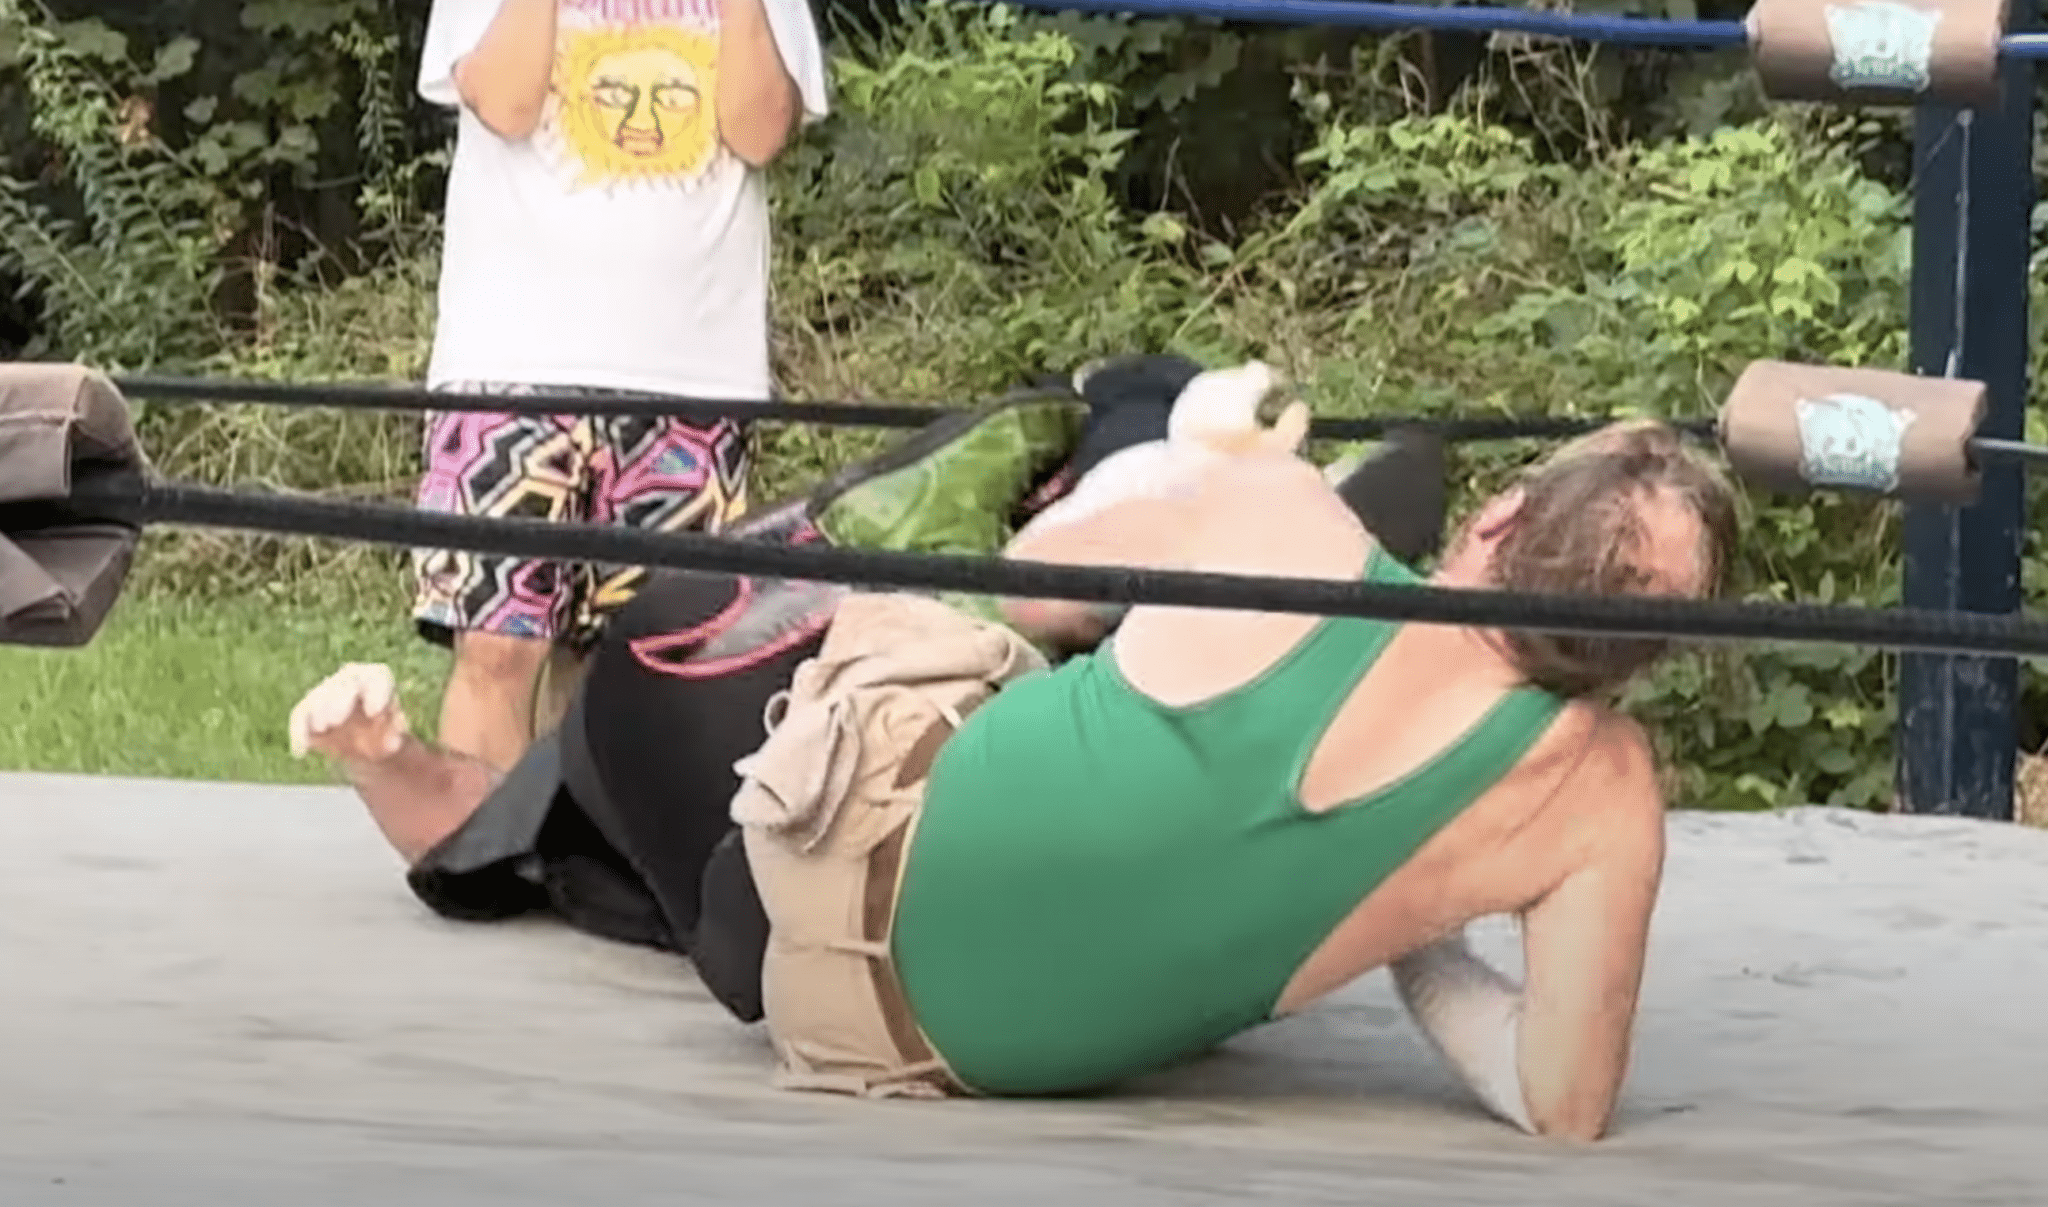 This backyard pro wrestling video is the height of American exceptionalism